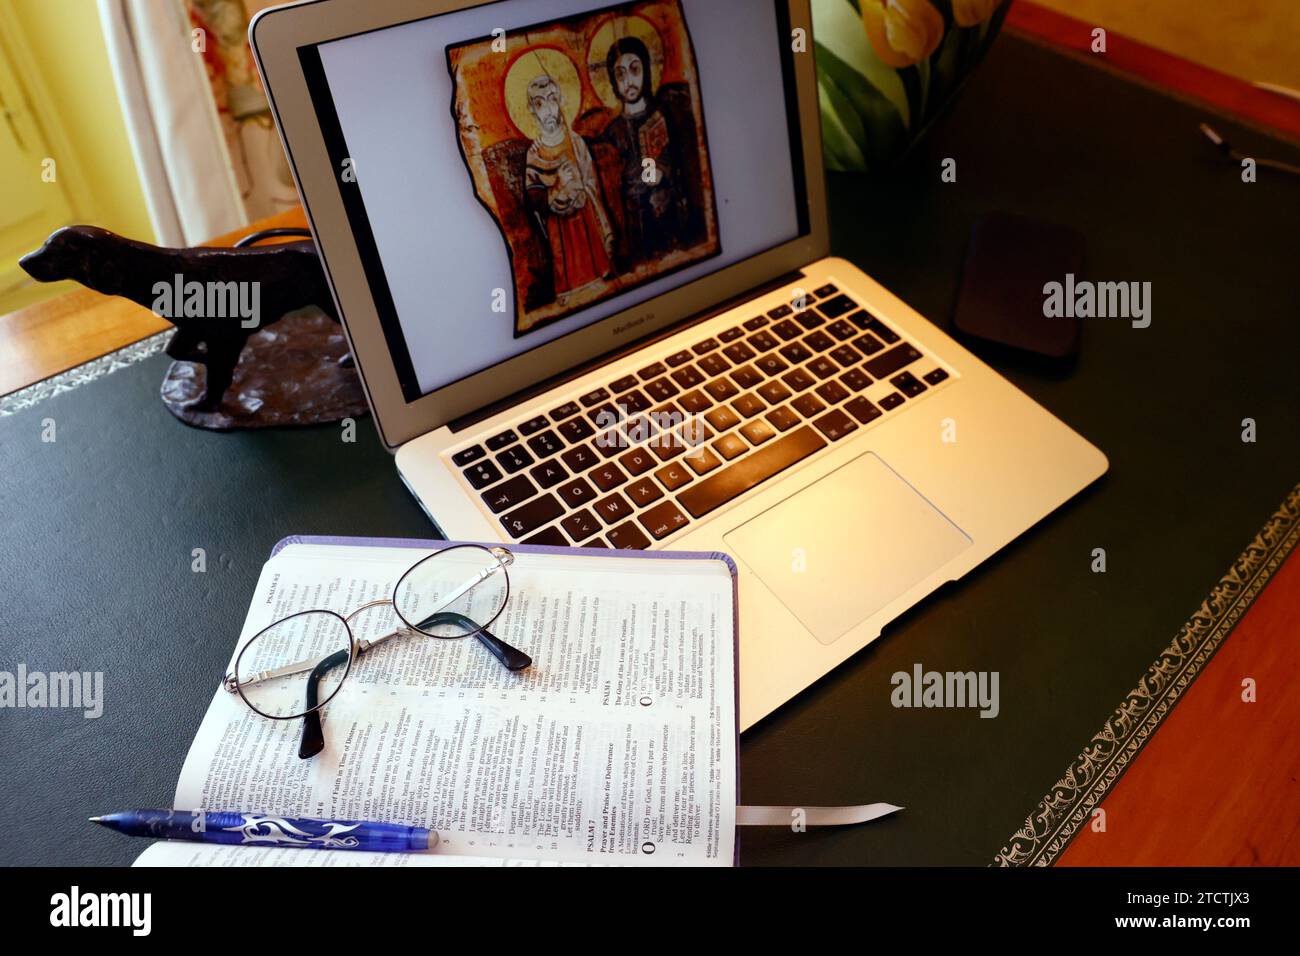 Bible study. Laptop and open bible with glasses. Stock Photo